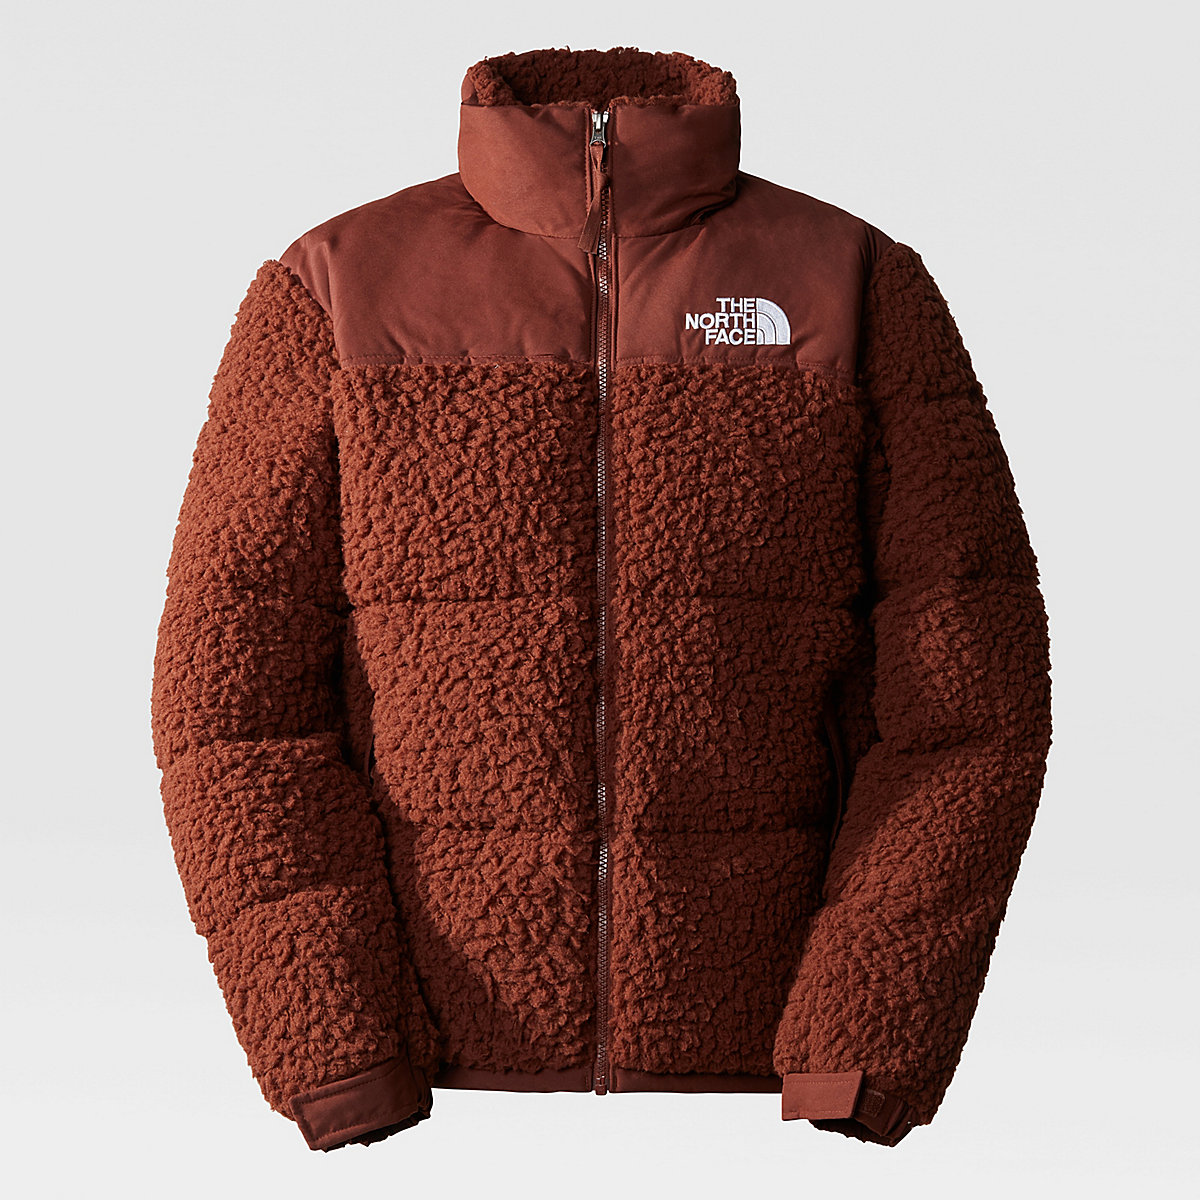 The Best Variants of The North Face Nuptse in 2023 - casual-closet